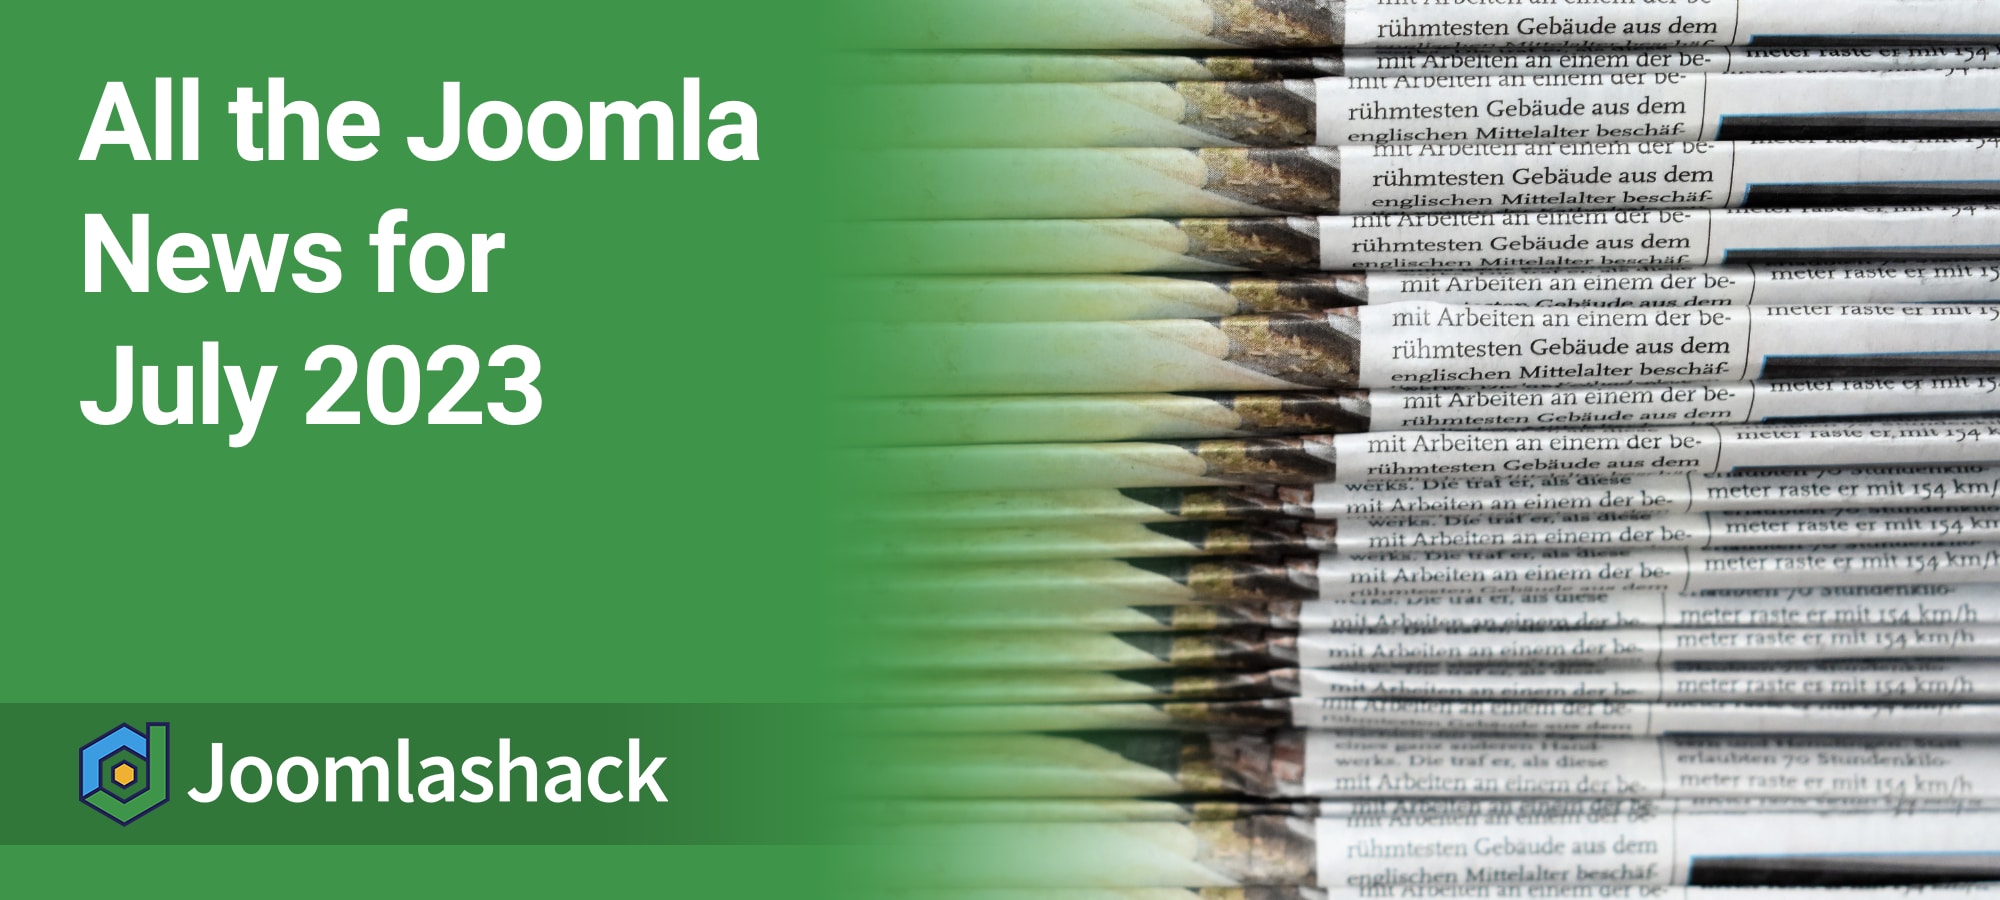 All the Joomla News for July 2023